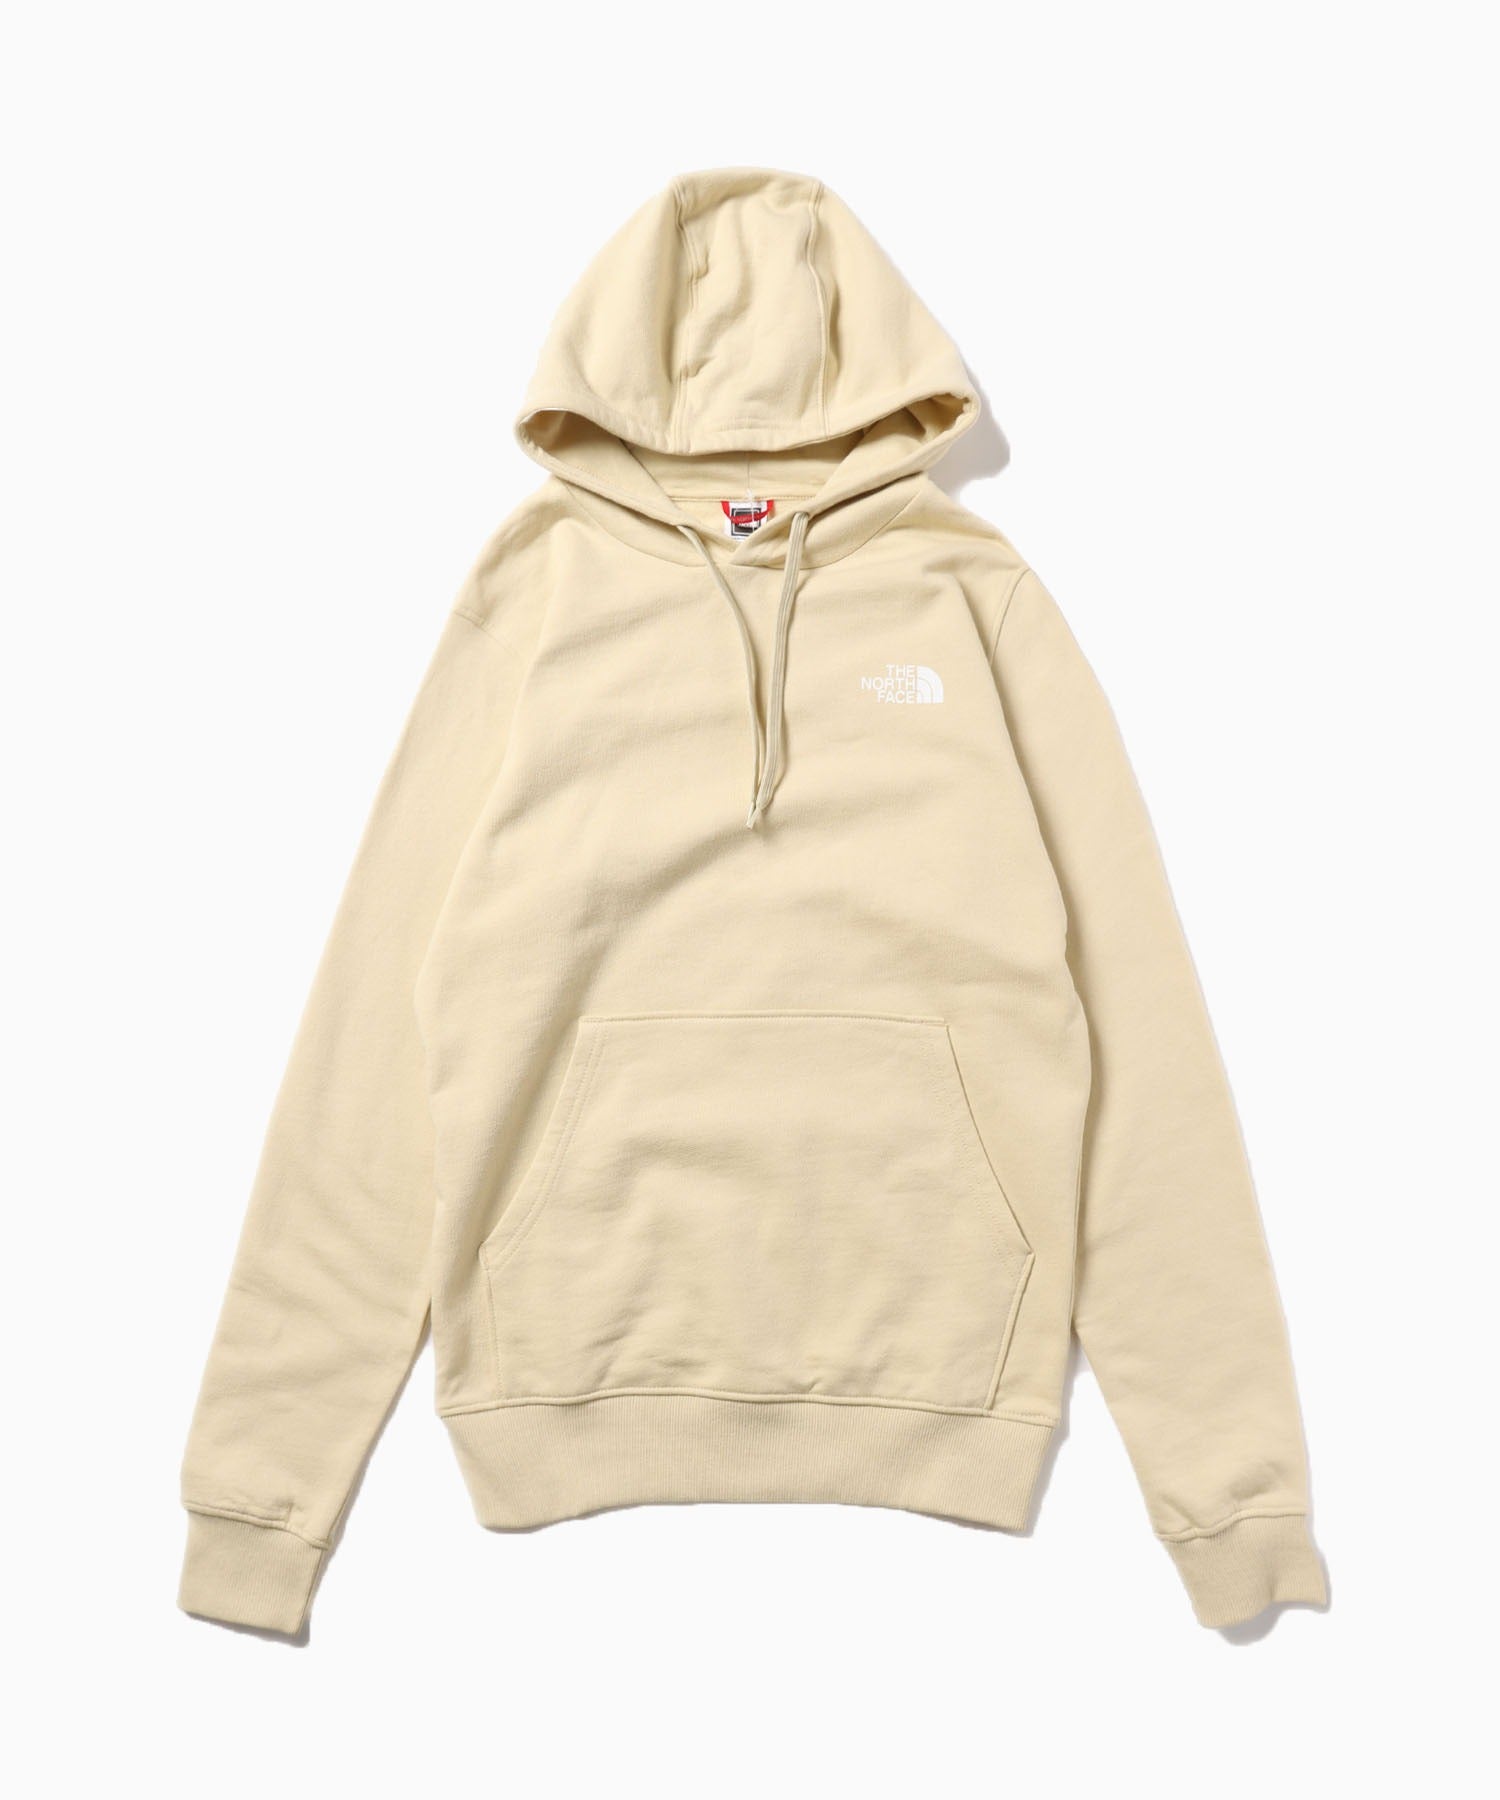 THE NORTH FACE/ザ・ノースフェイス Men's Simple Dome Hoodie